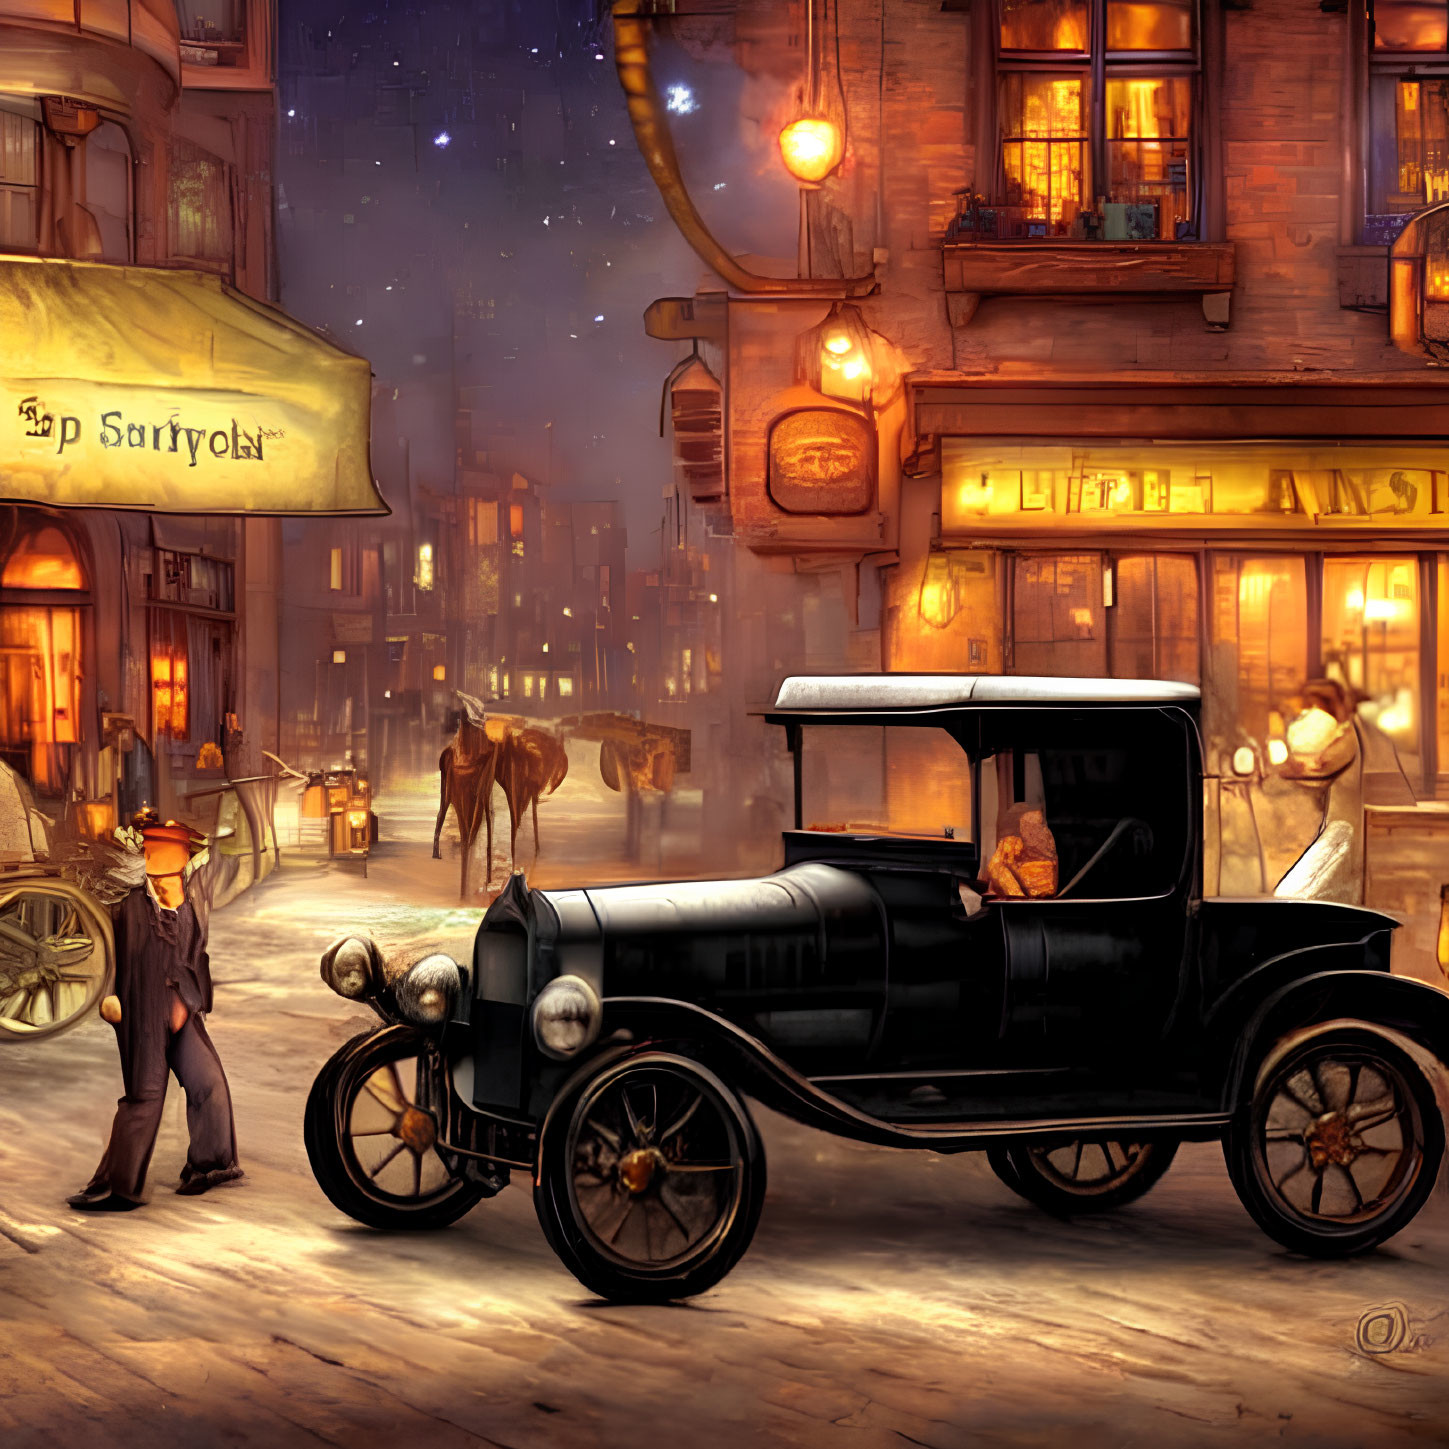 Vintage car and man tipping hat in old-fashioned street scene at dusk